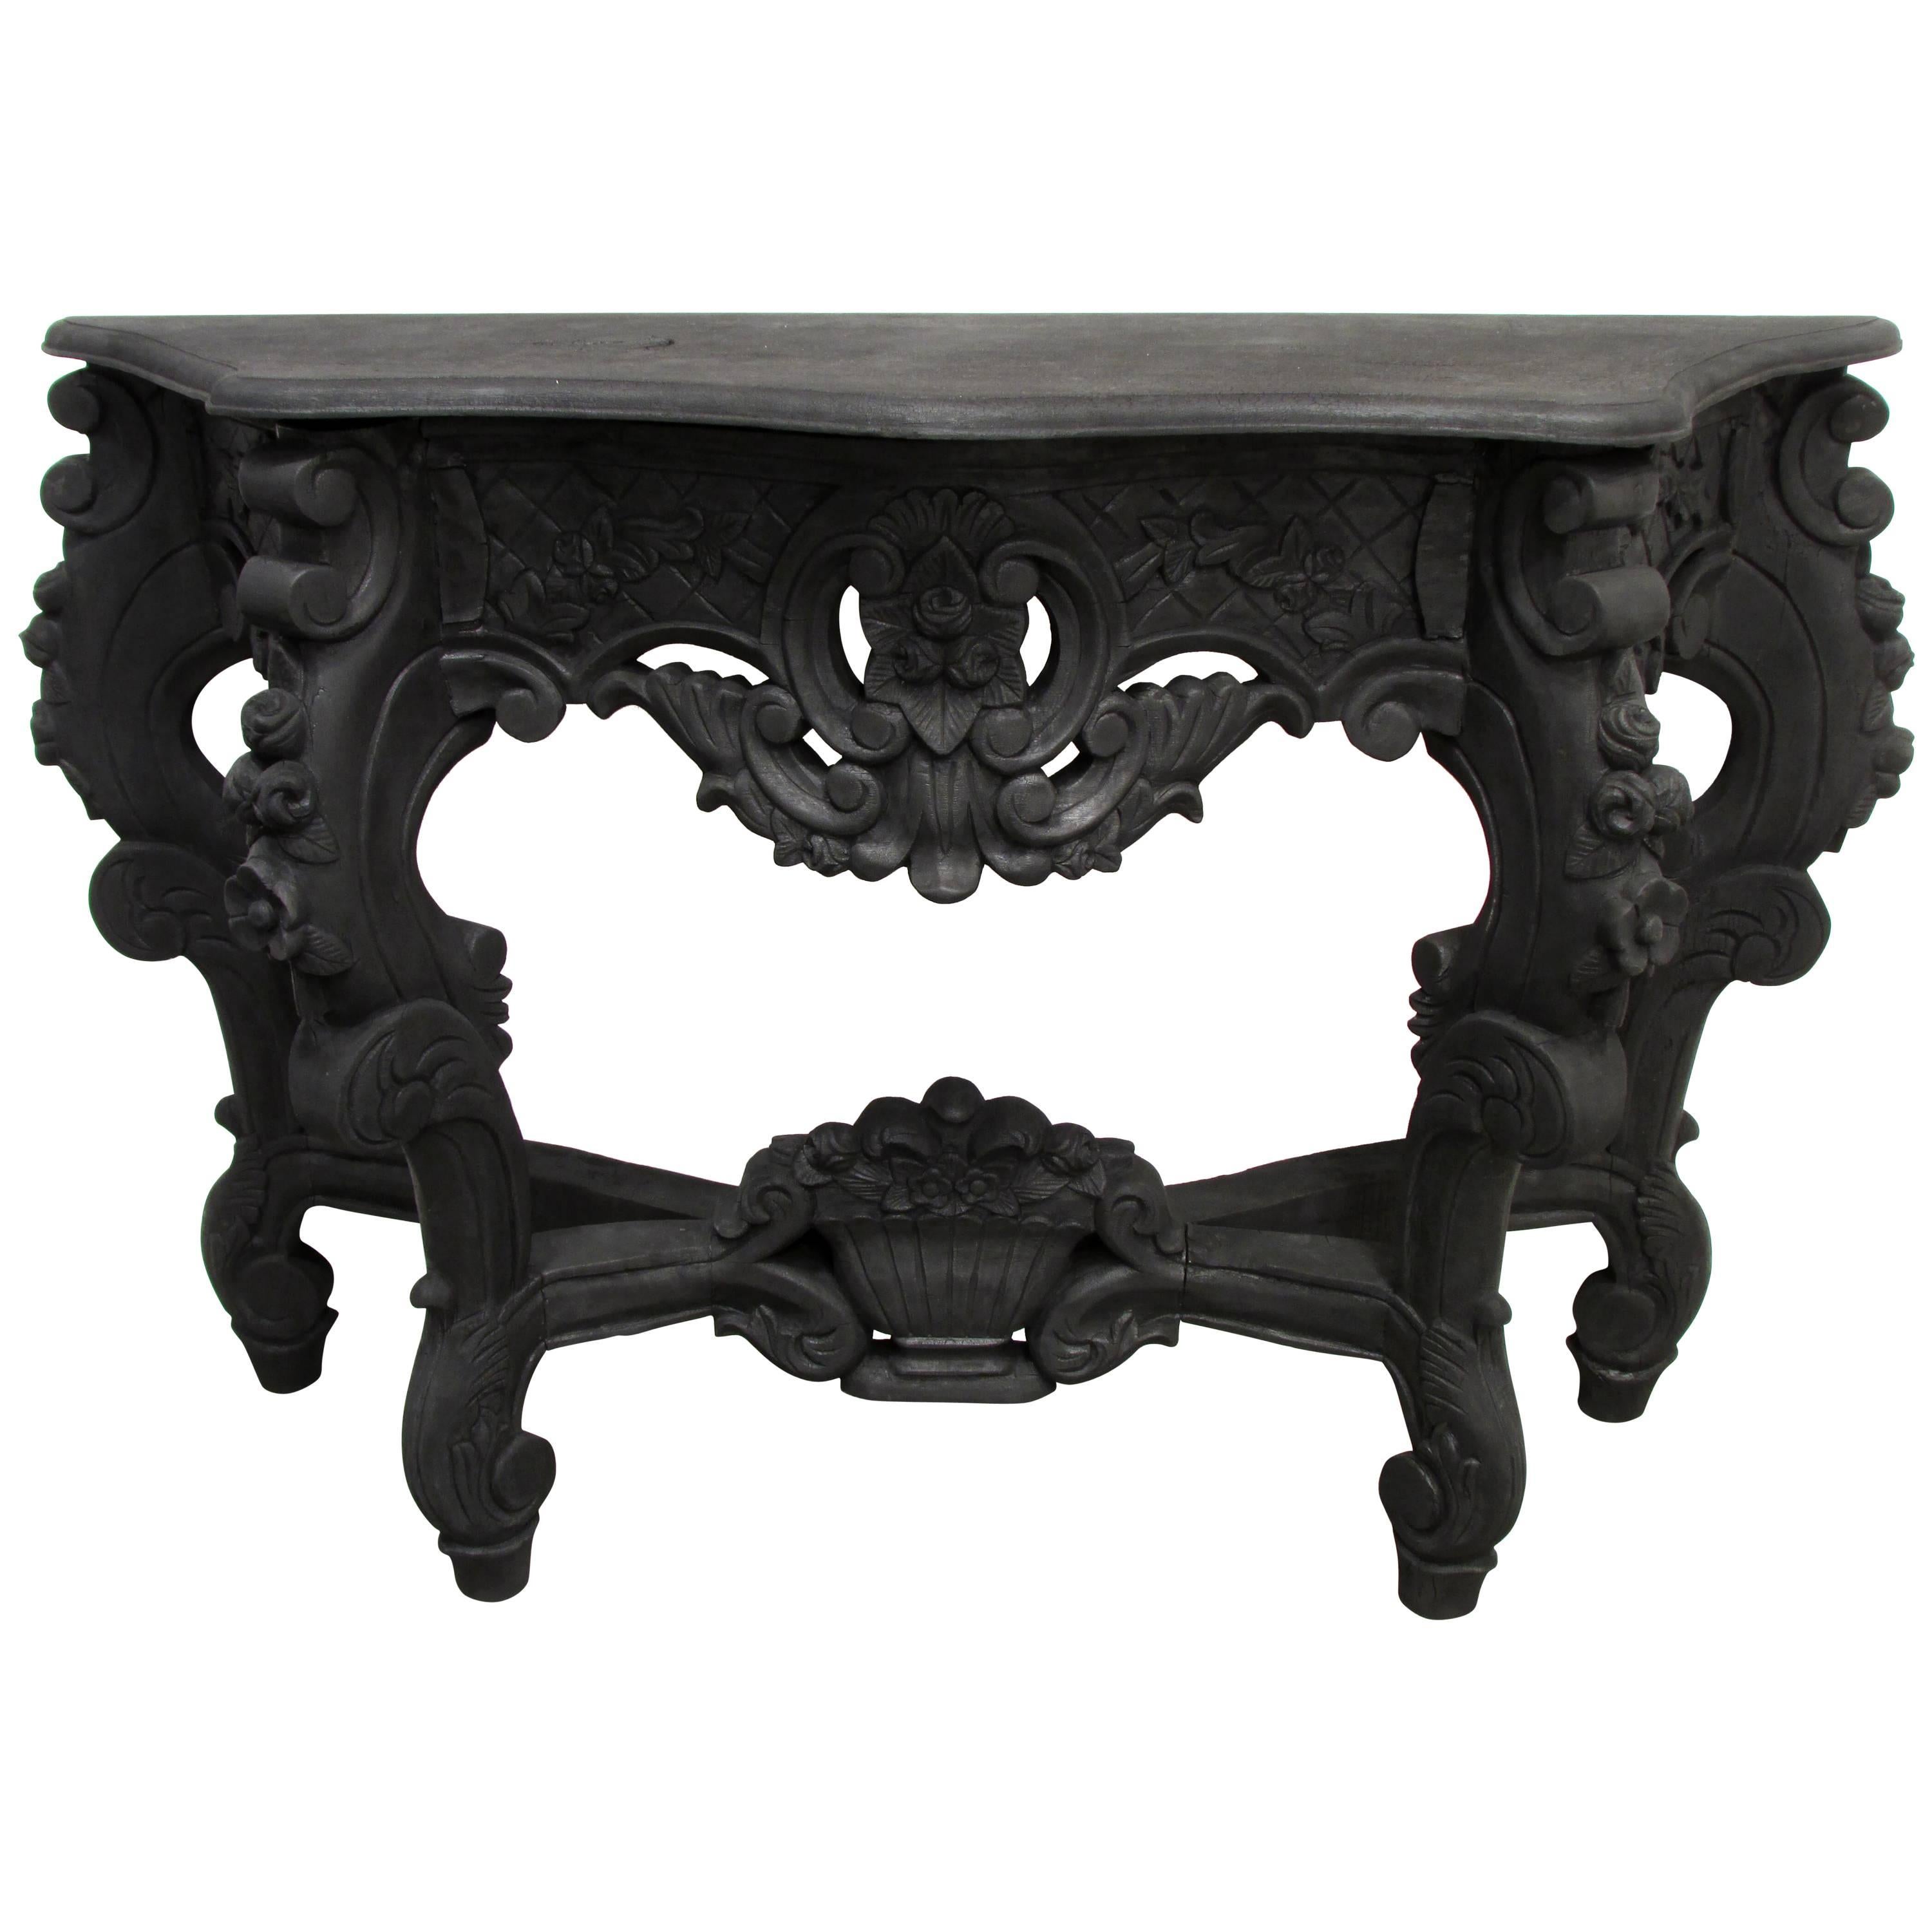 Charred Louis XV Style Console